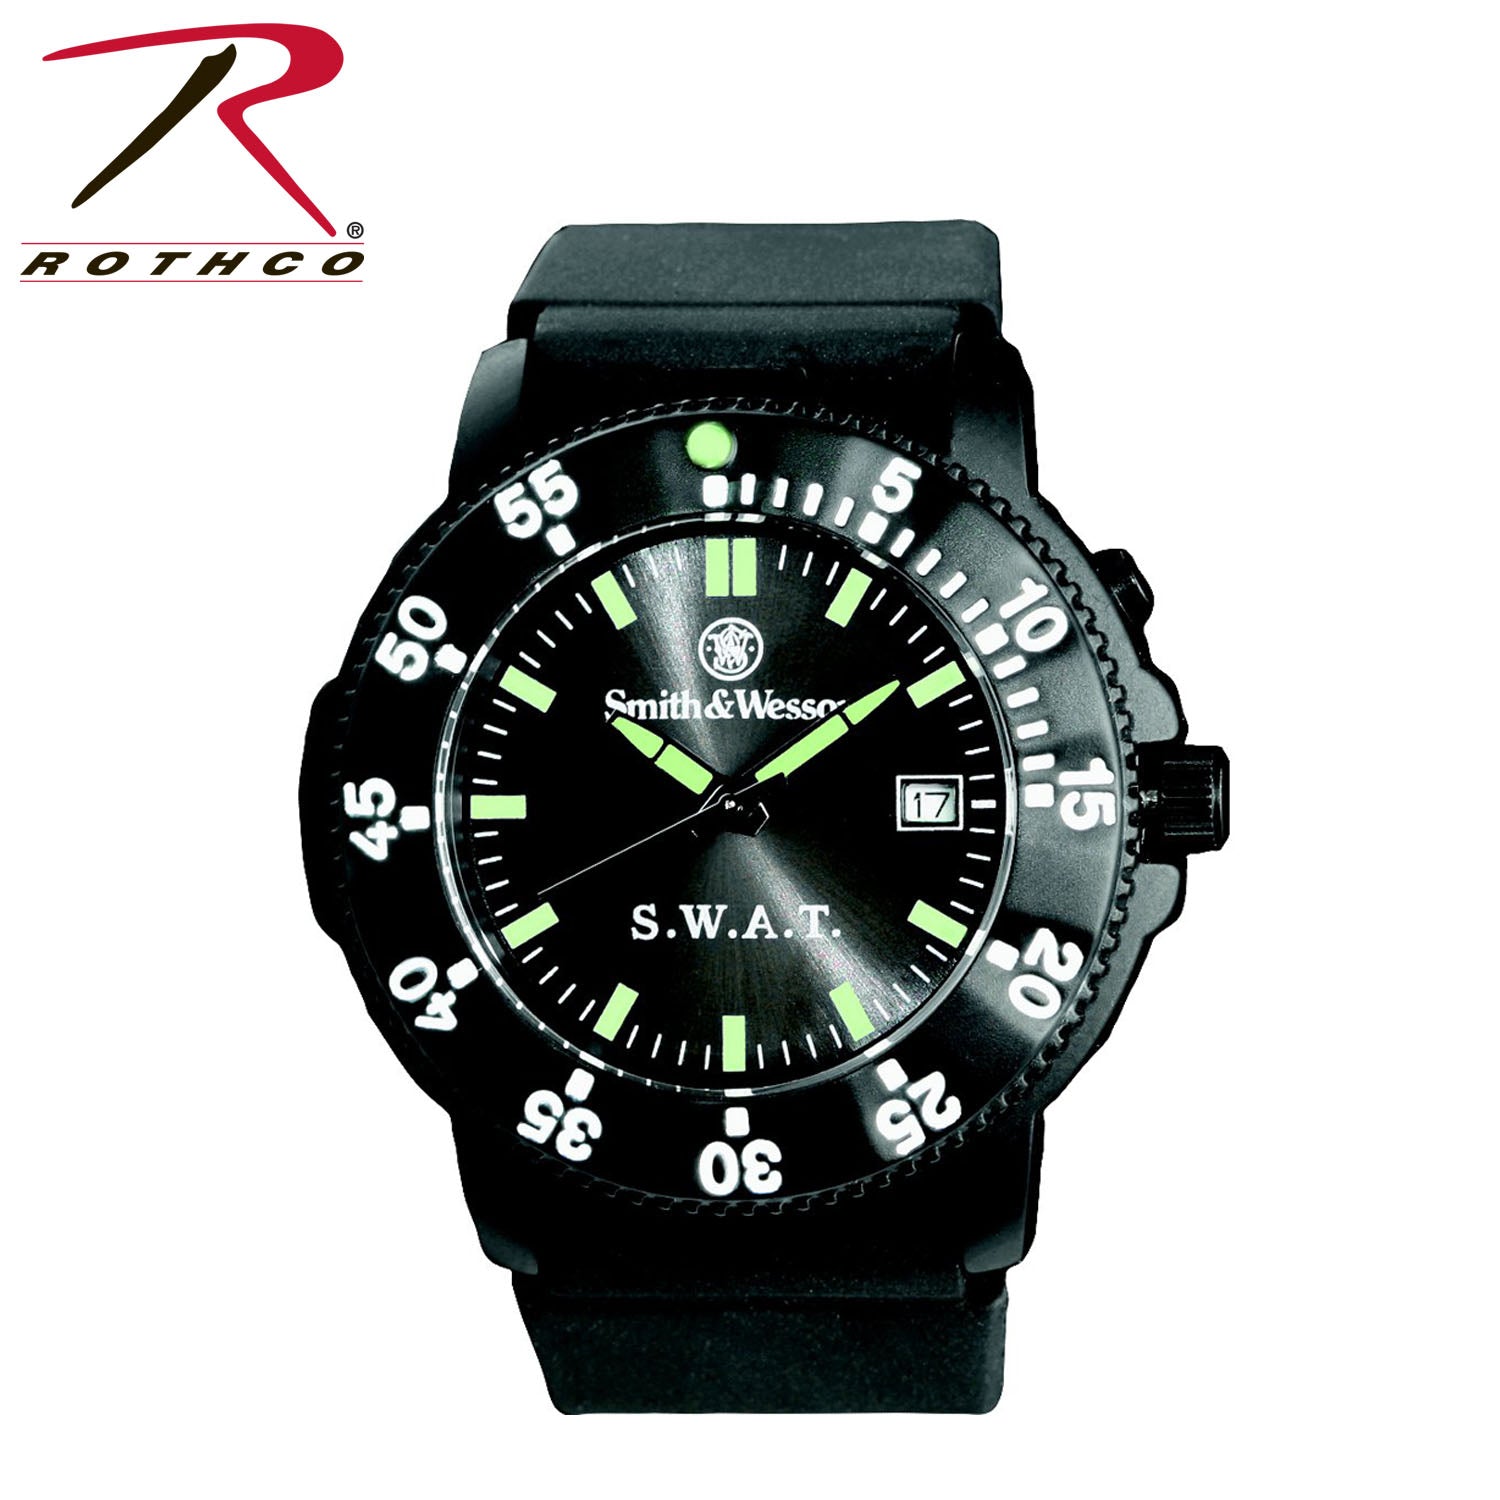 Smith & Wesson S.W.A.T. Watch Watches MilTac Tactical Military Outdoor Gear Australia